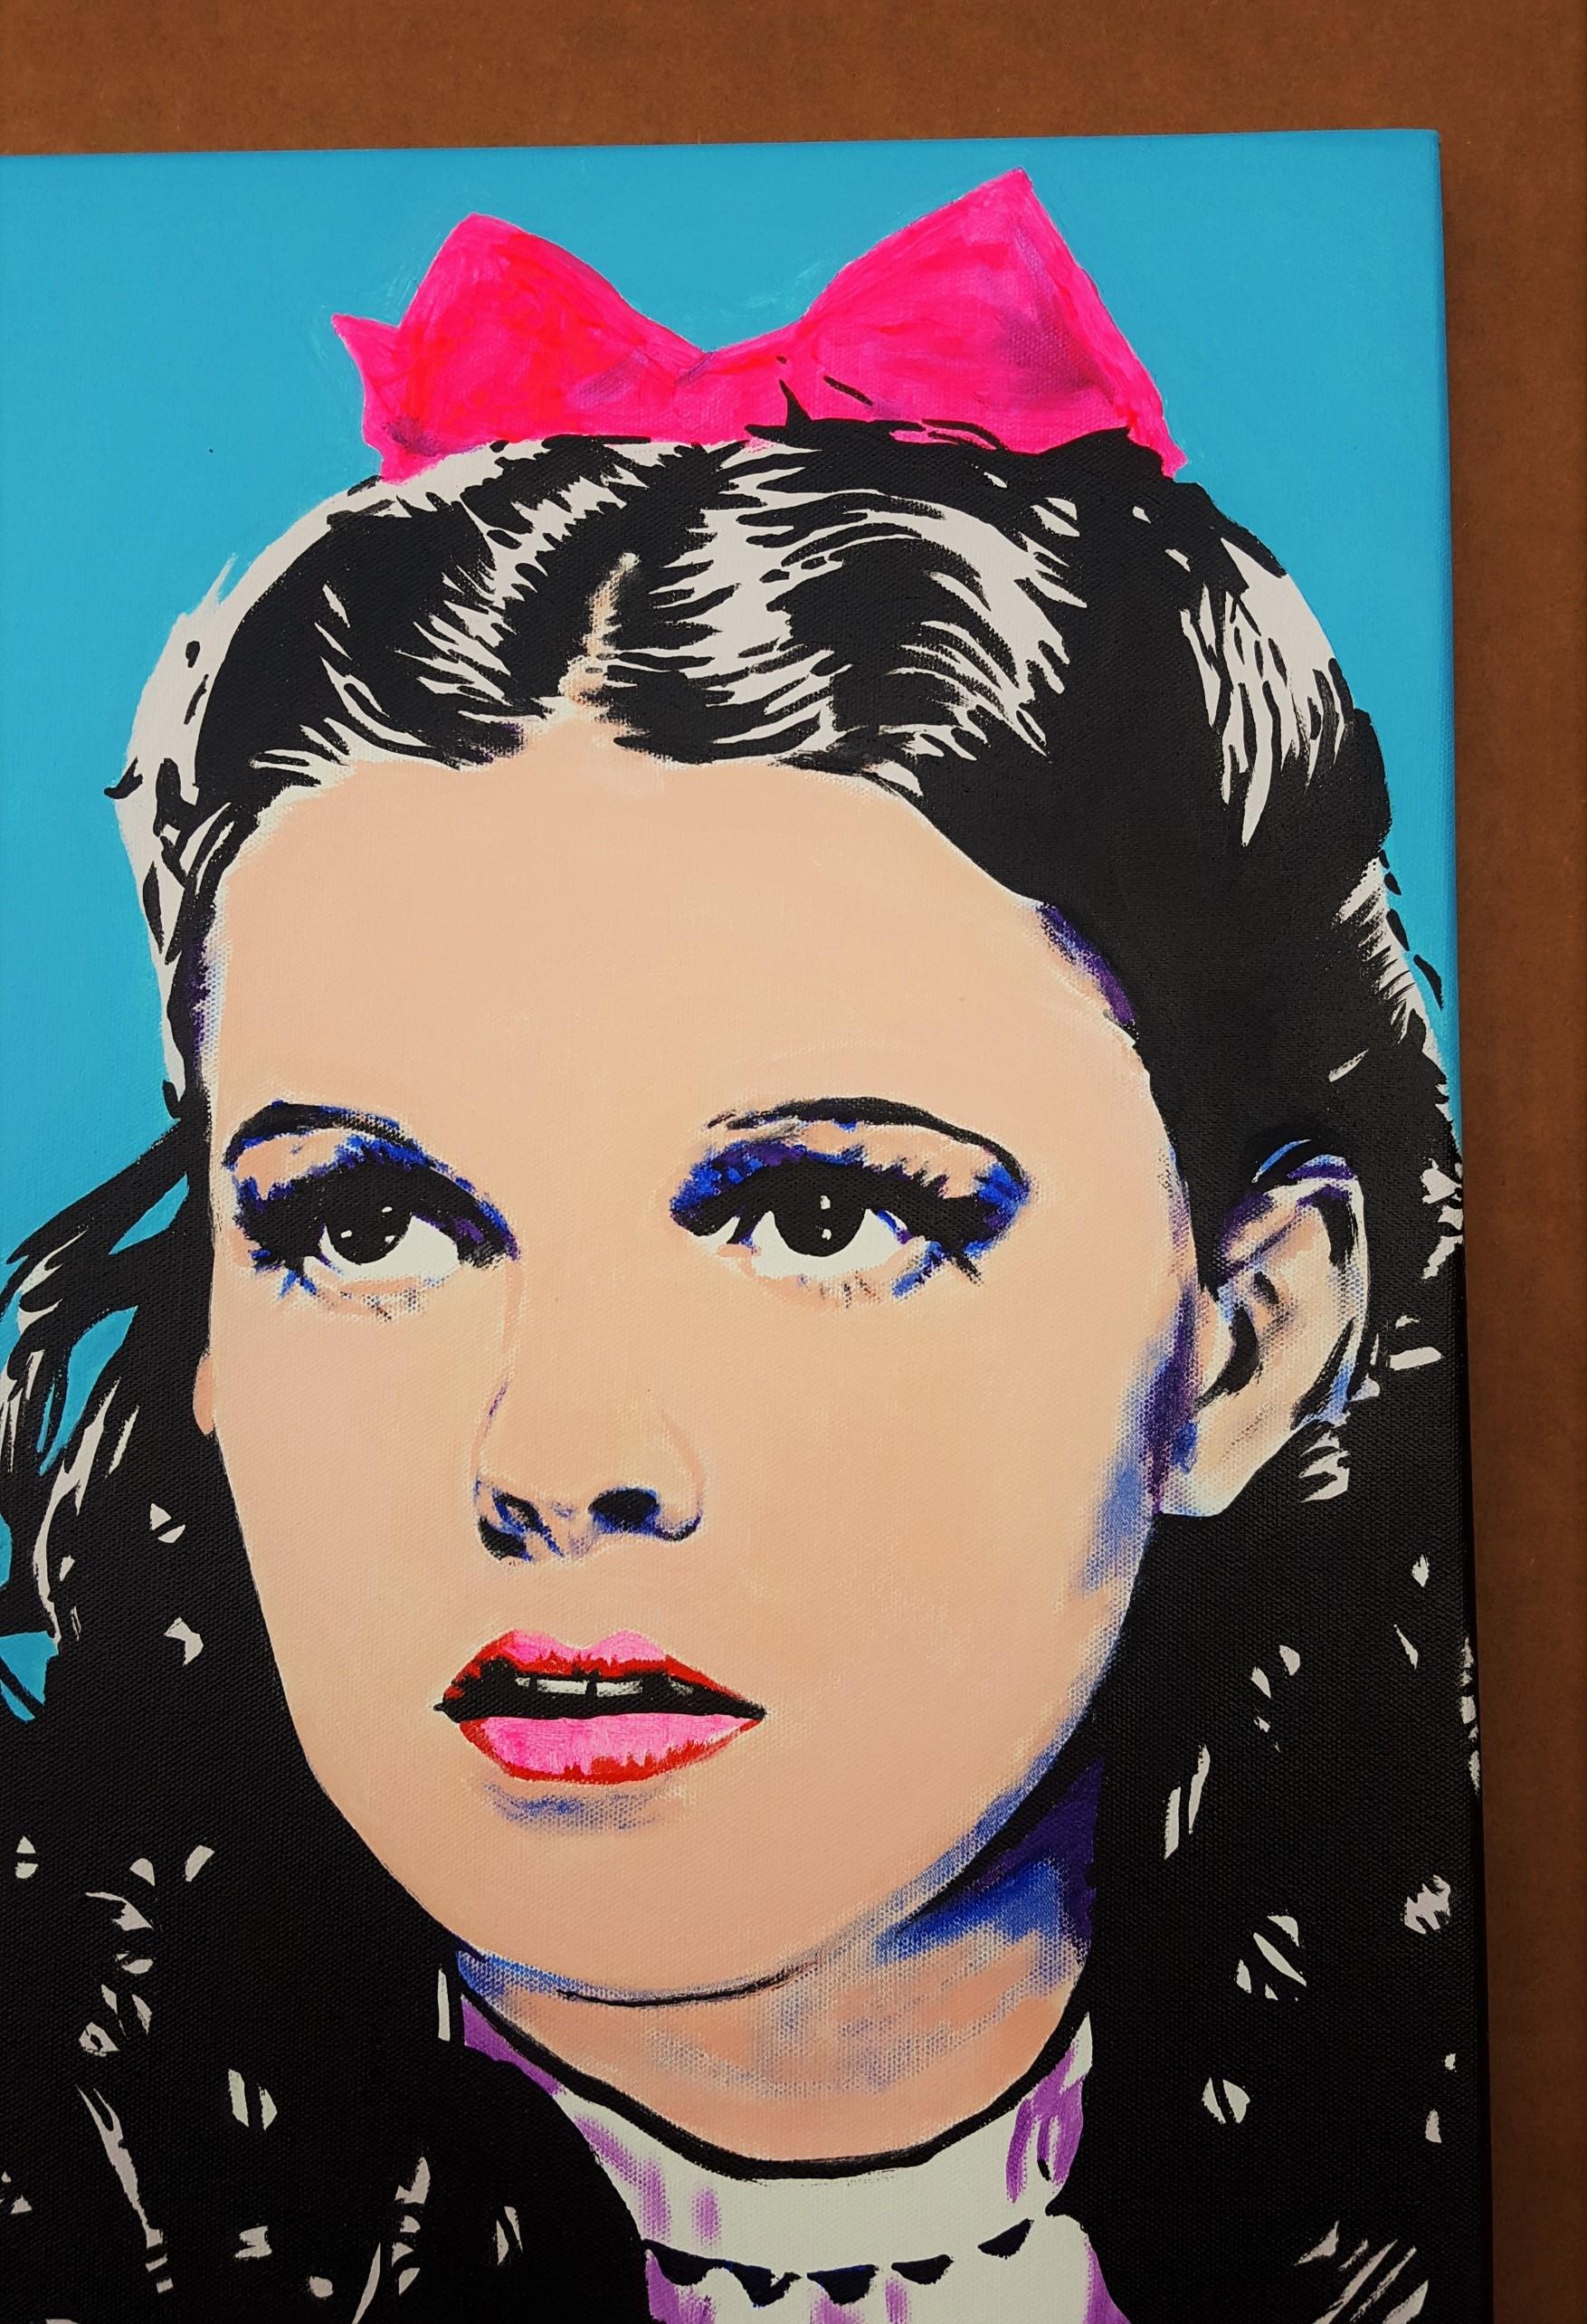 Dorothy x2 Icon (Judy Garland) - Contemporary Painting by Jack Graves III